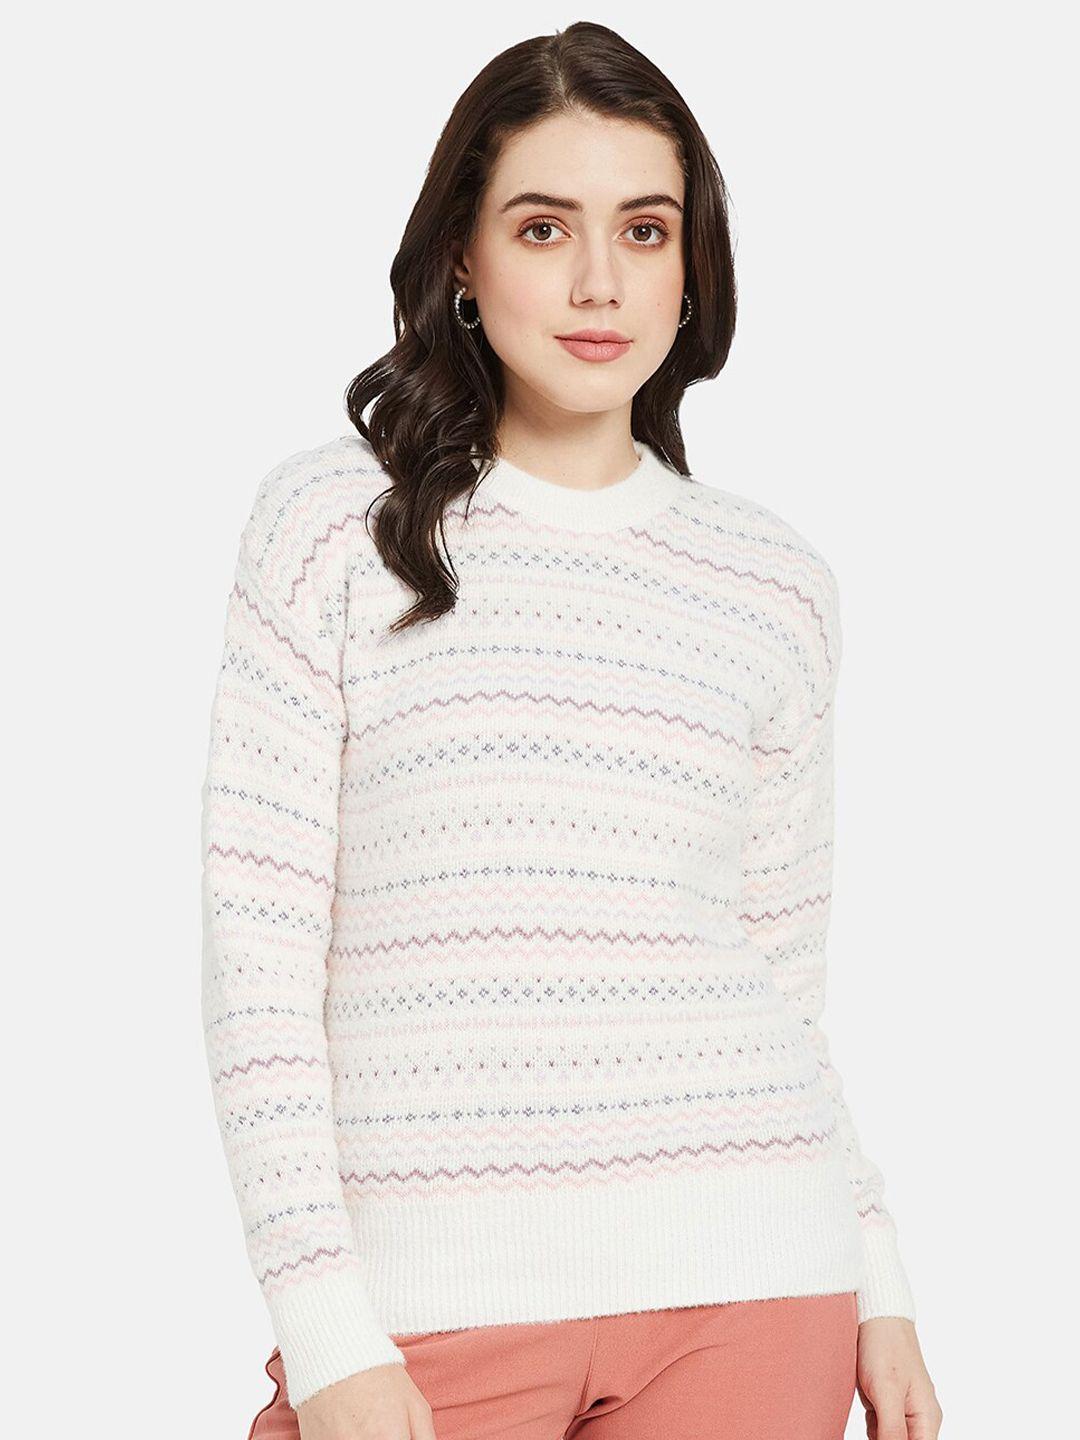 mettle-geometric-printed-round-neck-pullover-sweater